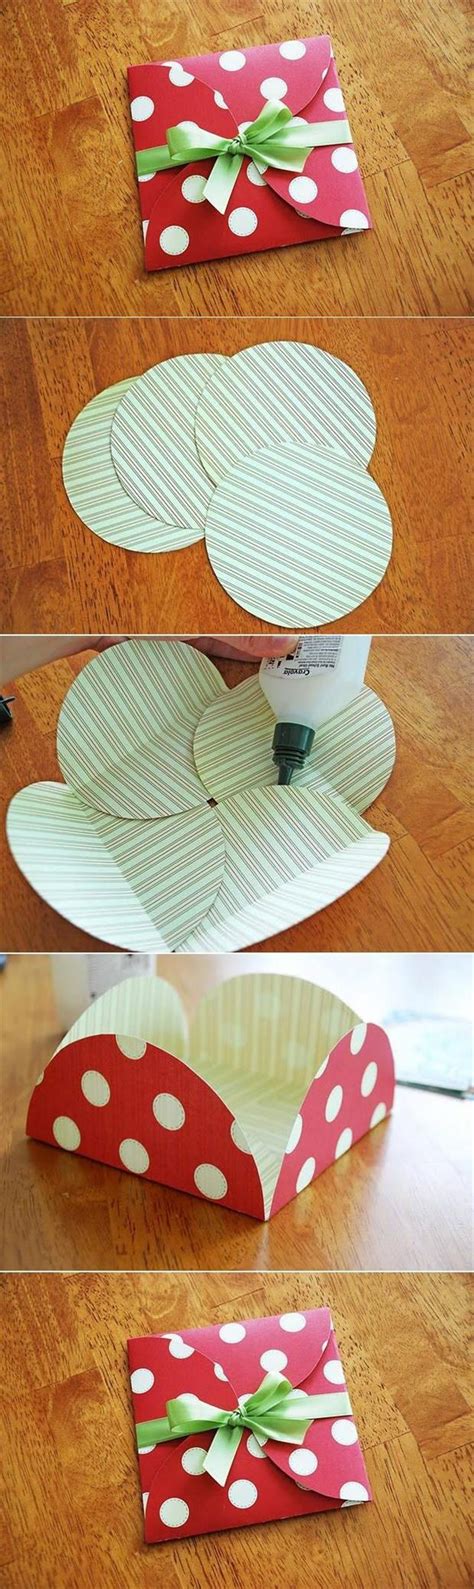 Simple Do It Yourself Craft Ideas 70 Pics